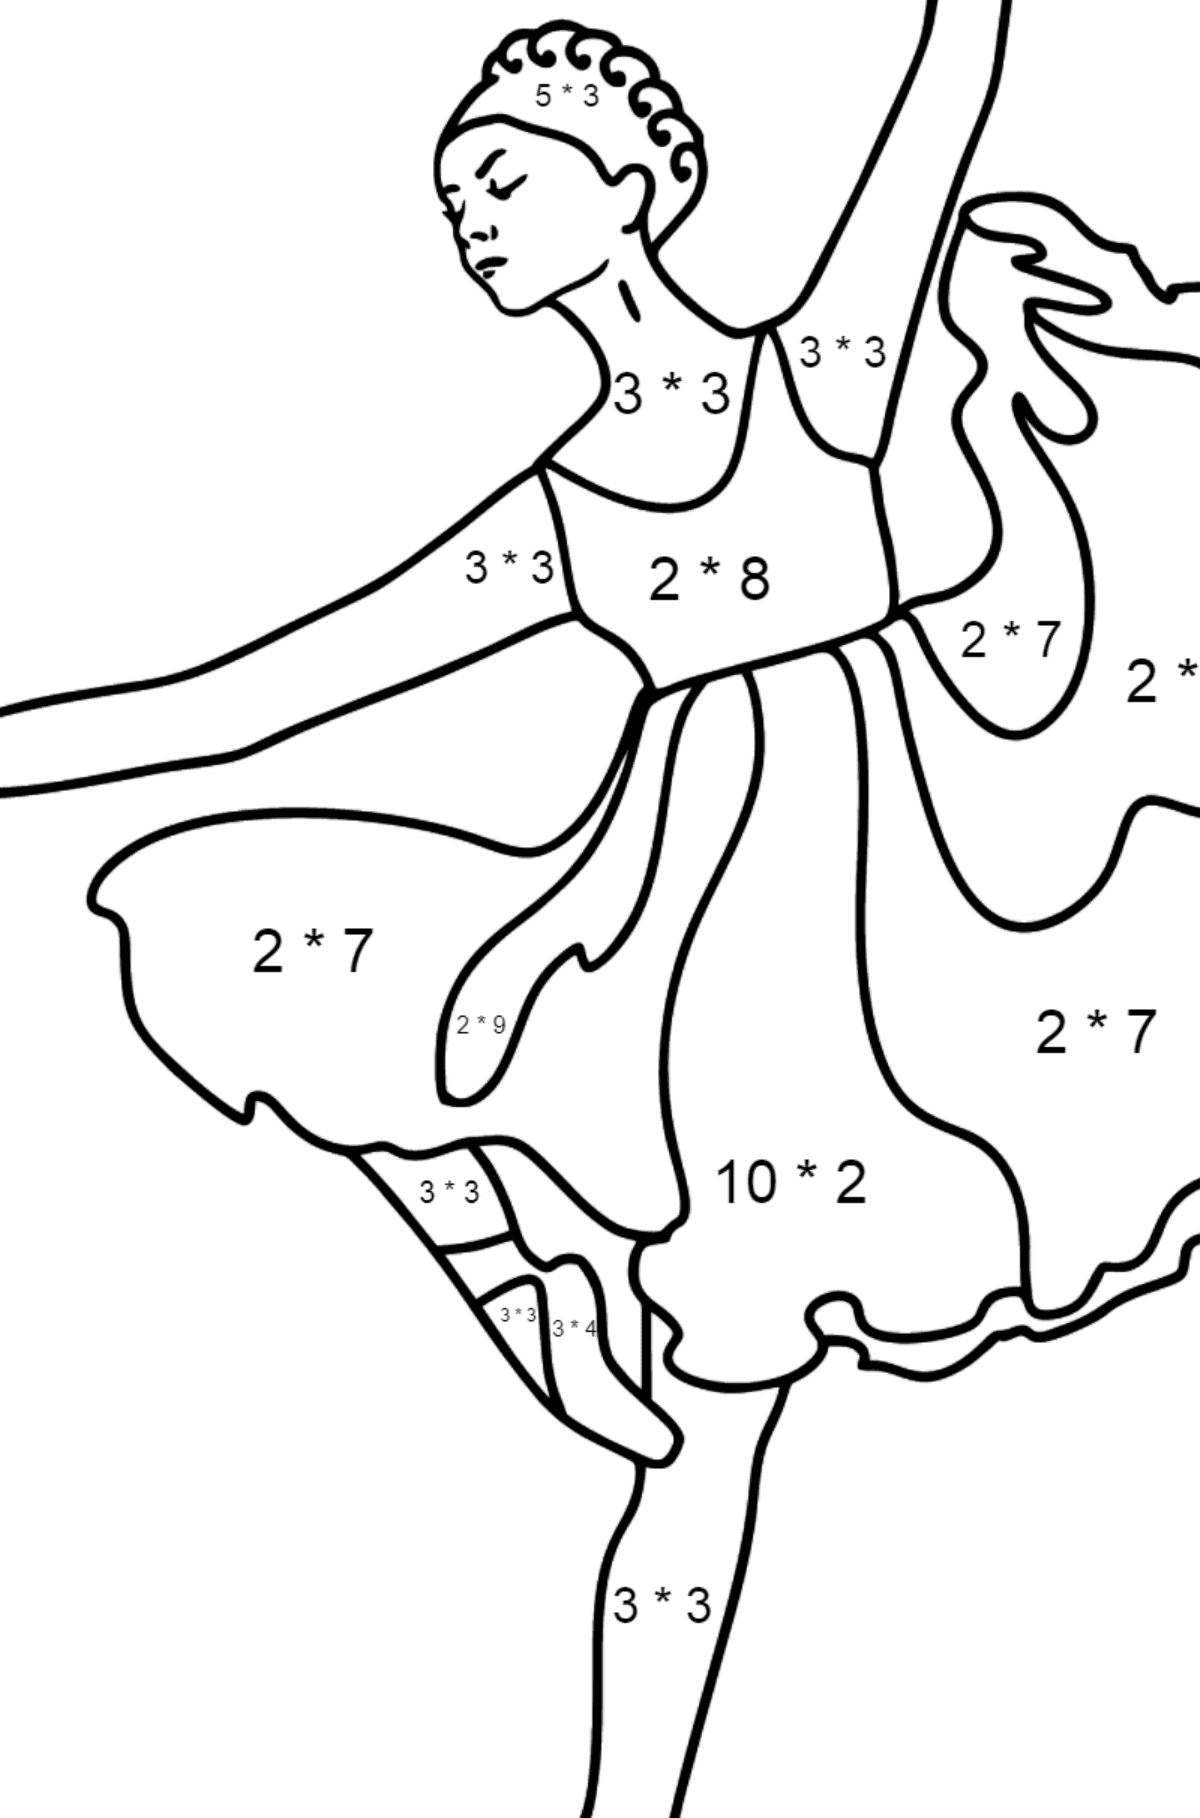 Ballerina in Lilac Dress coloring page - Math Coloring - Multiplication for Kids